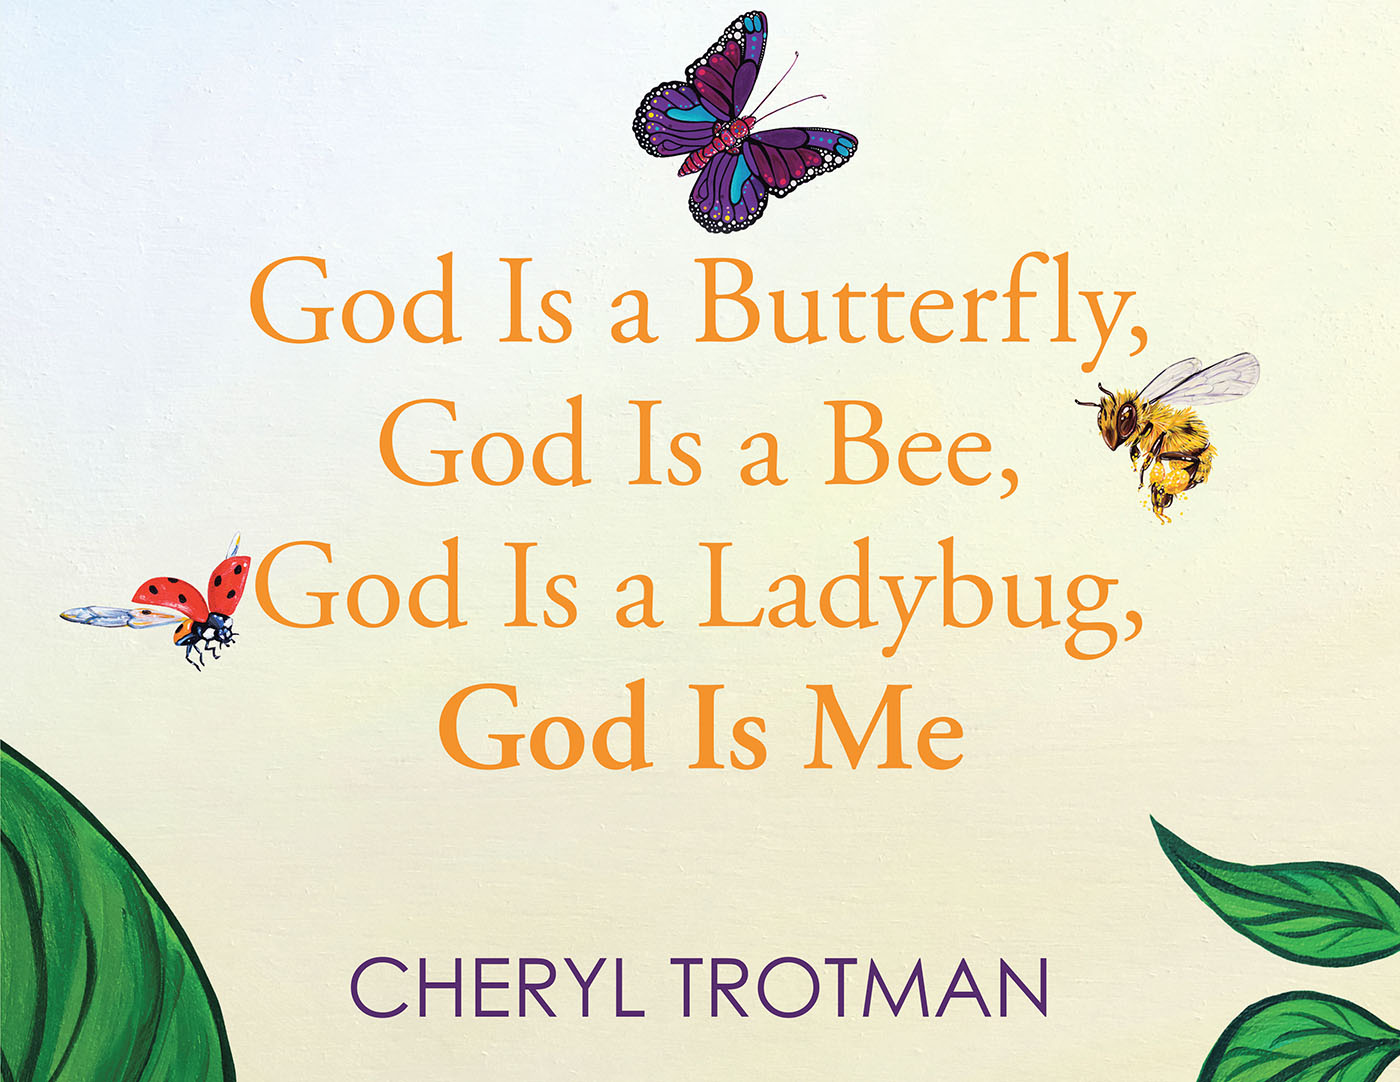 Cheryl Trotman’s Newly Released "God is a Butterfly, God is a Bee, God is a Ladybug, God is Me" is a Celebration of All God Has Created